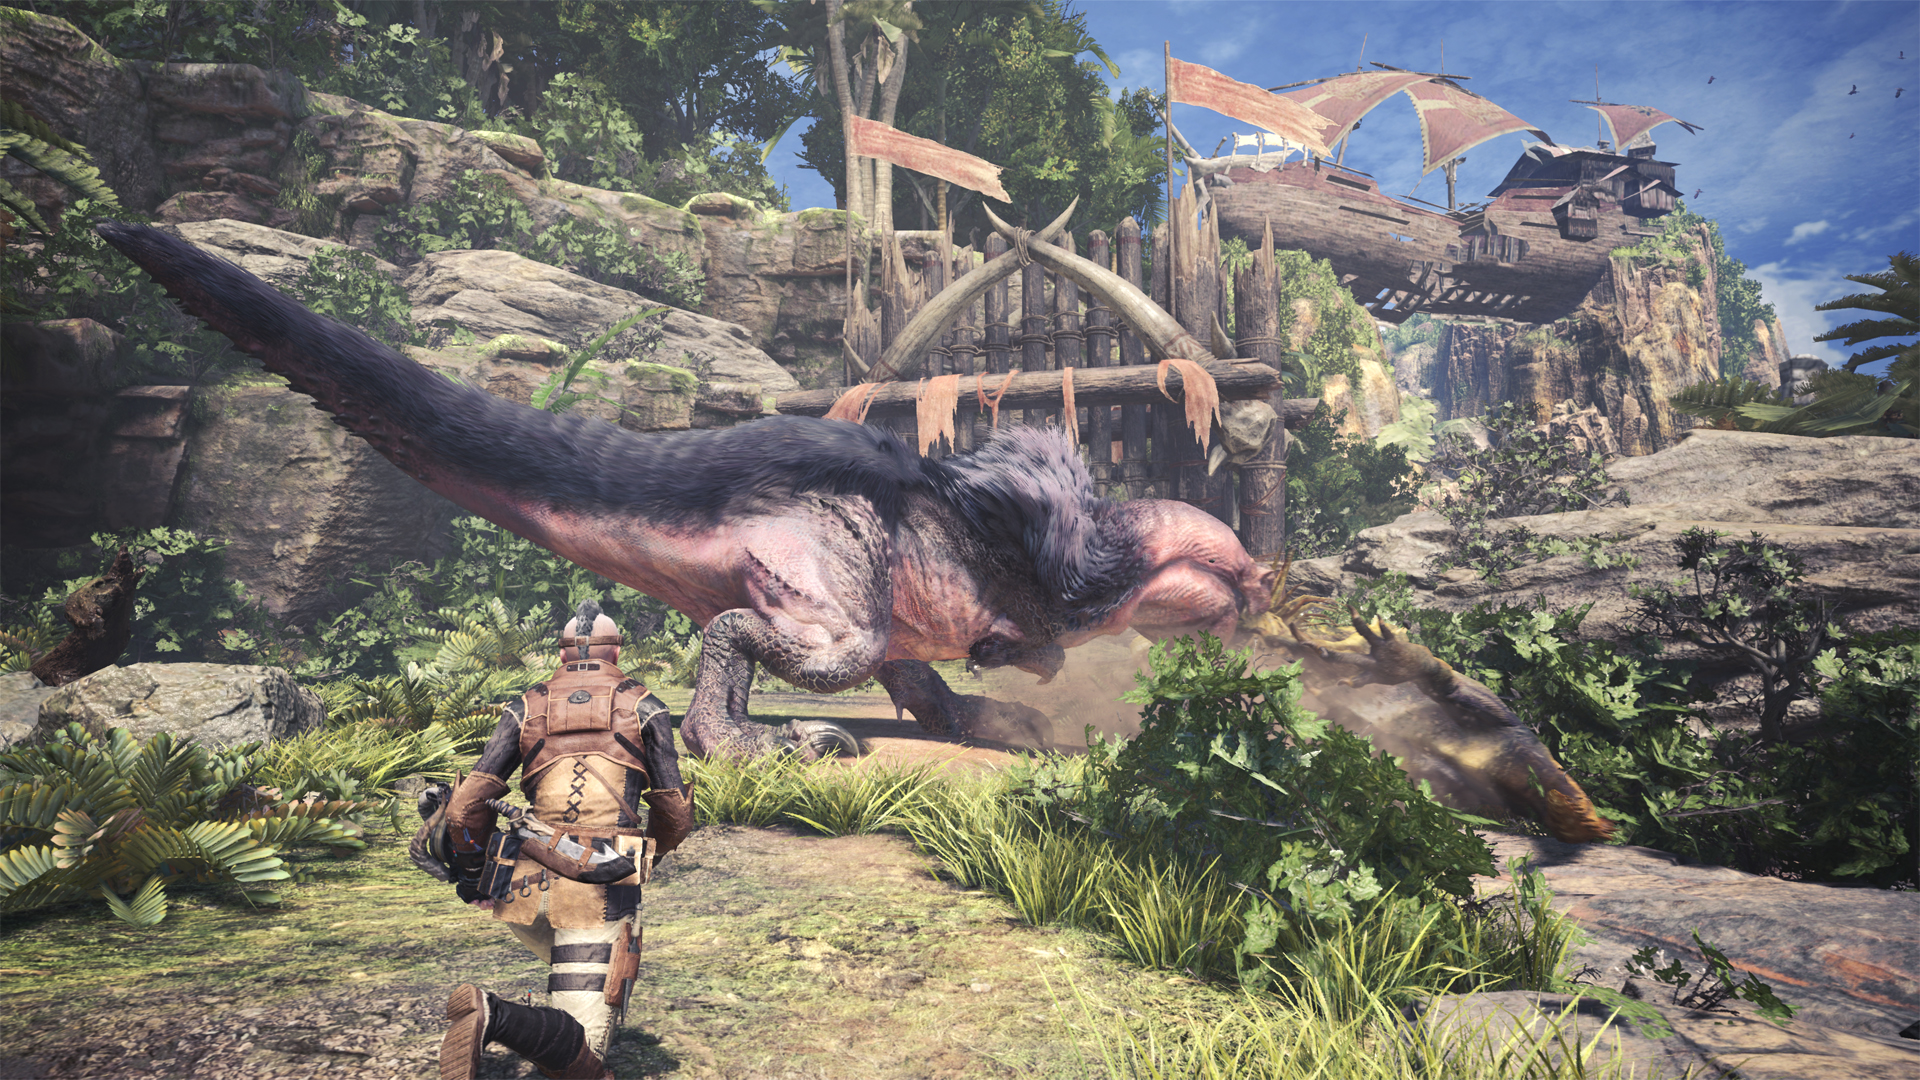 Monster Hunter World Pc Performance Review Capcom S Creature Feature Delivers Just Pcgamesn